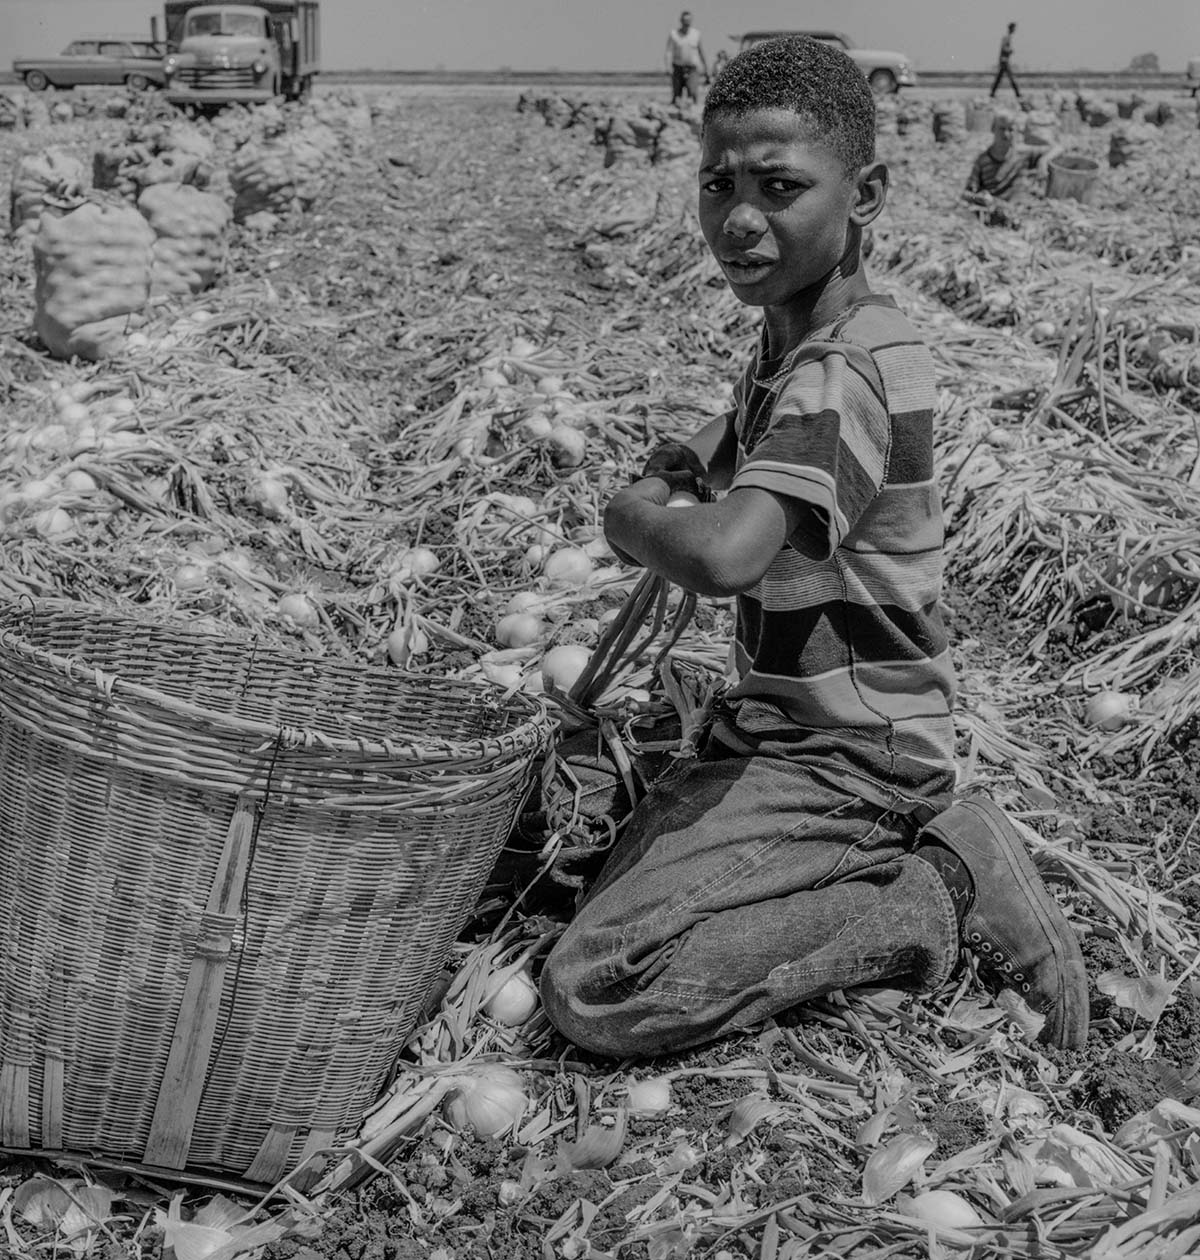 African American boy harvesting onions in a field near Modesto, July 11, 1961. Courtesy Ernest Lowe, photographer.